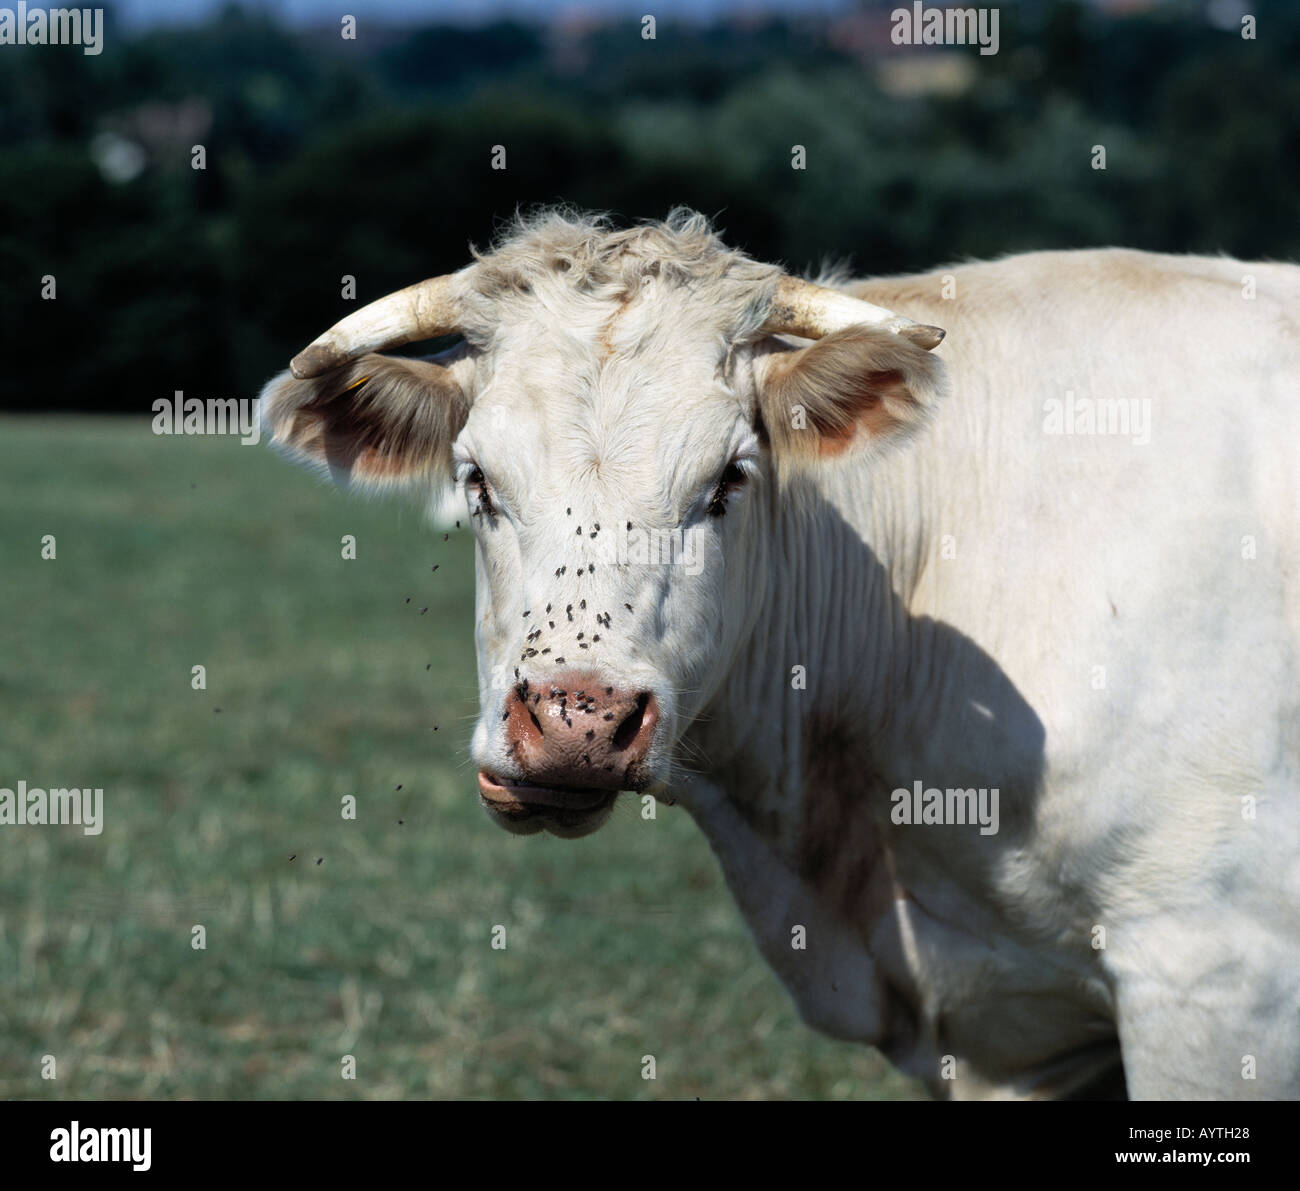 Germany, North Rhine-Westphalia, Ruhr area, D-Bochum, bulls on a pasture, white, meadow landscape, ox, oxes, bull, cow, cows, cattle, animal, animals, animal world, fauna, agriculture, agrarian country, farming, cattle farming, cattle breeding, stock farm Stock Photo